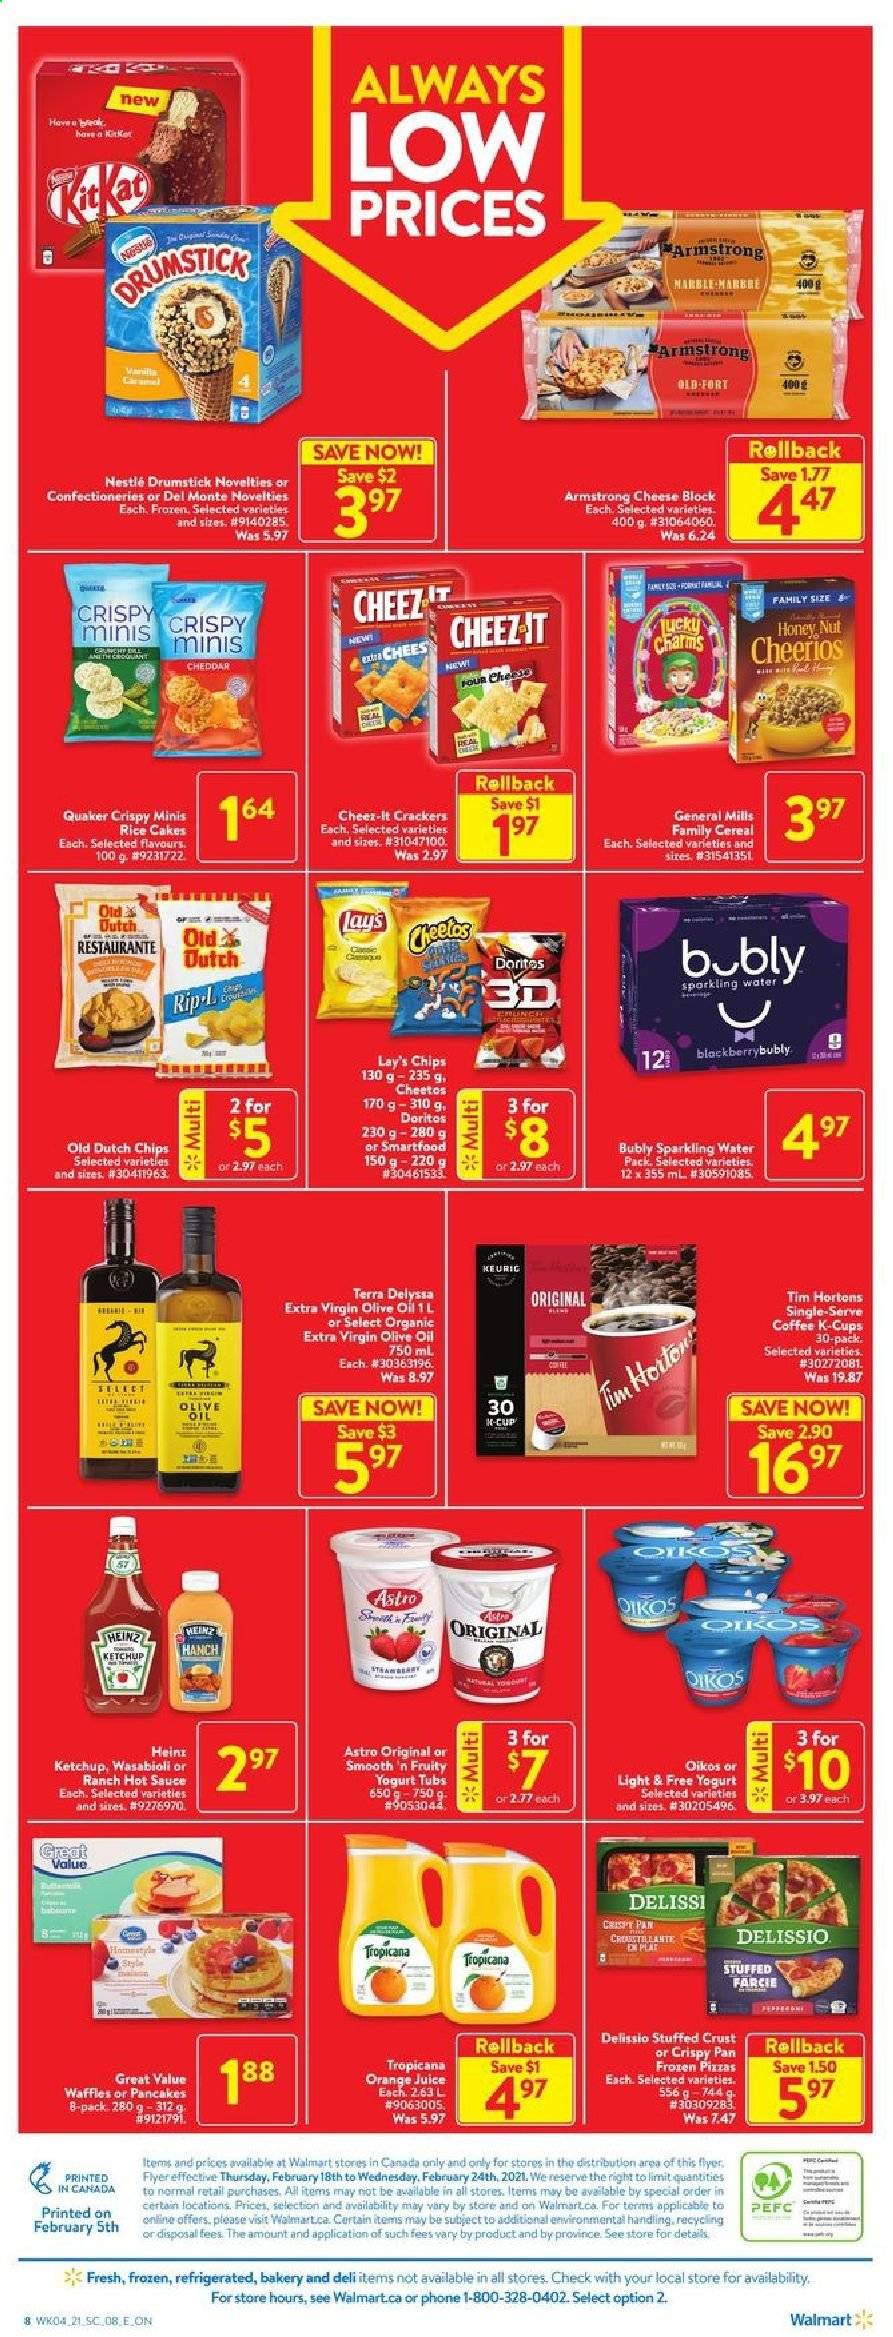 thumbnail - Walmart Flyer - February 18, 2021 - February 24, 2021 - Sales products - waffles, pizza, sauce, Quaker, yoghurt, Oikos, crackers, Doritos, Cheetos, Lay’s, Smartfood, Heinz, cereals, Cheerios, hot sauce, extra virgin olive oil, olive oil, oil, orange juice, juice, sparkling water, coffee, coffee capsules, K-Cups, pan, Nestlé. Page 2.